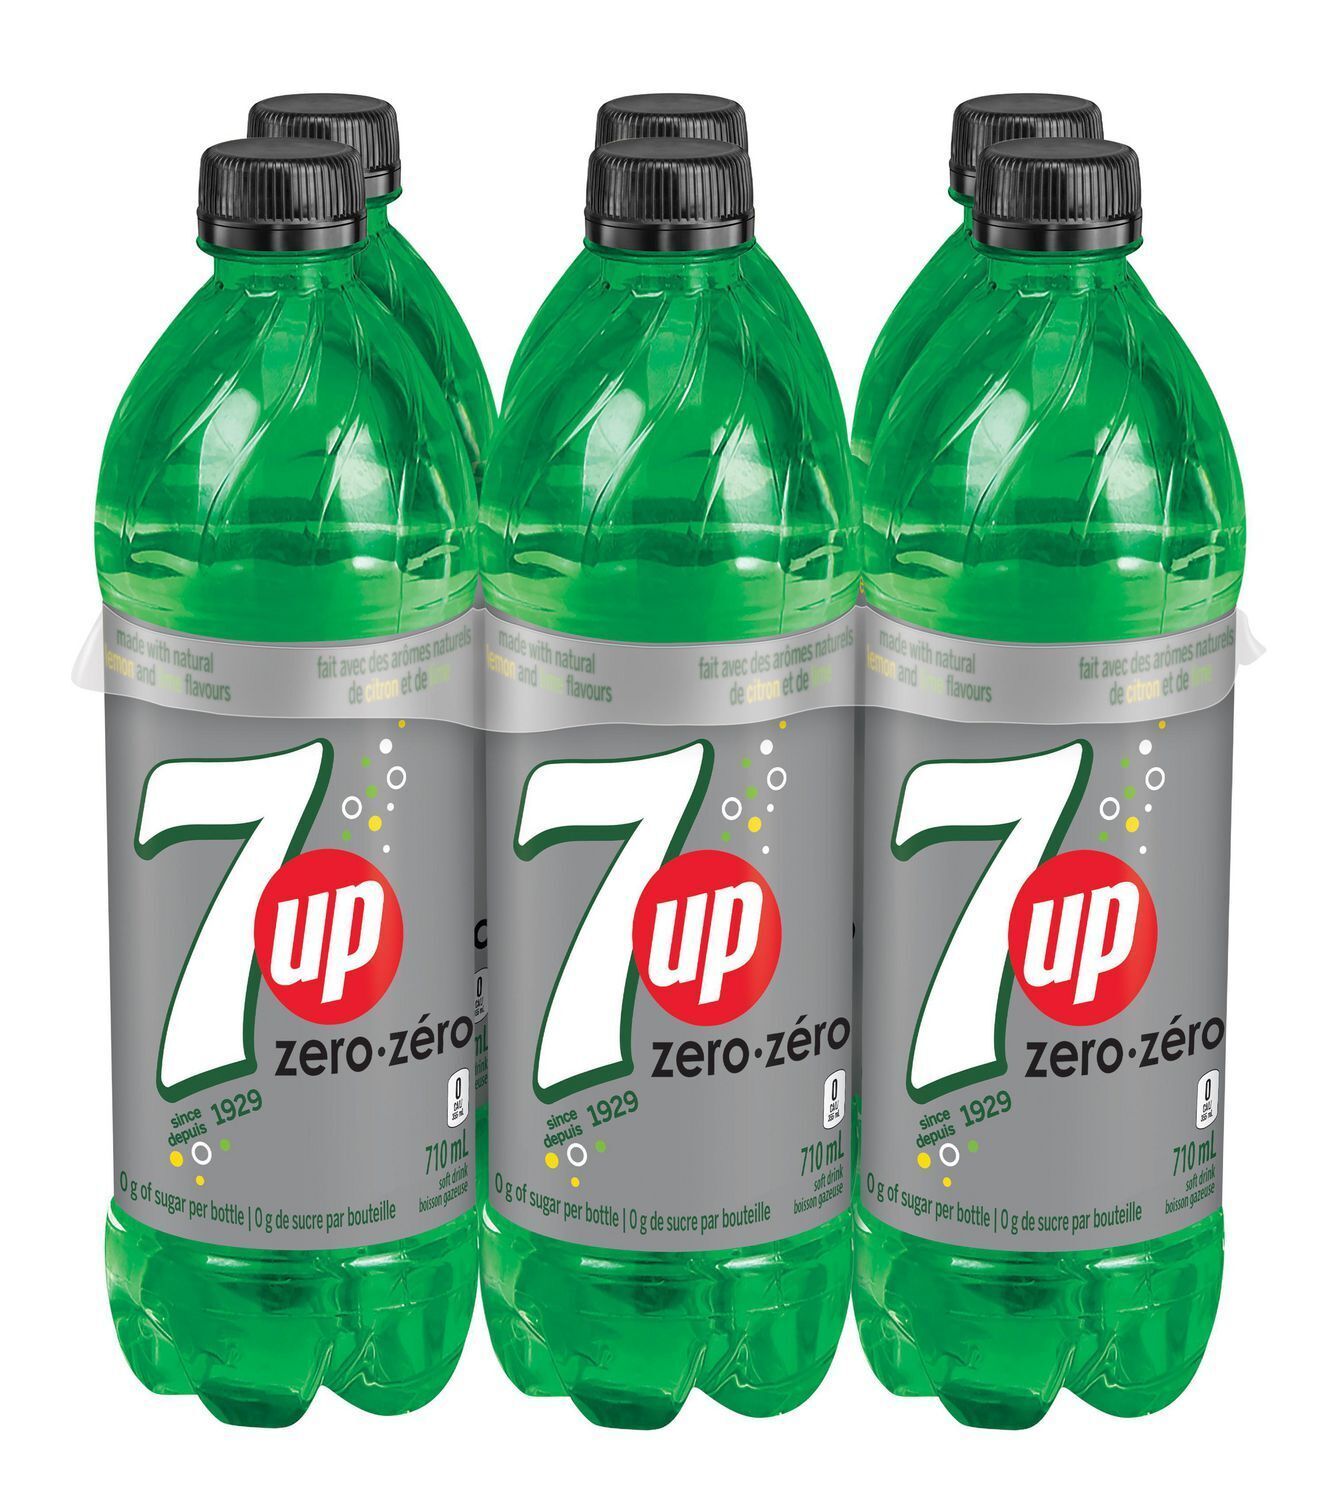 Primary image for 6 Bottles Of 7up Zero Calories Soft Drink 710ml Each -From Canada -Free Shipping